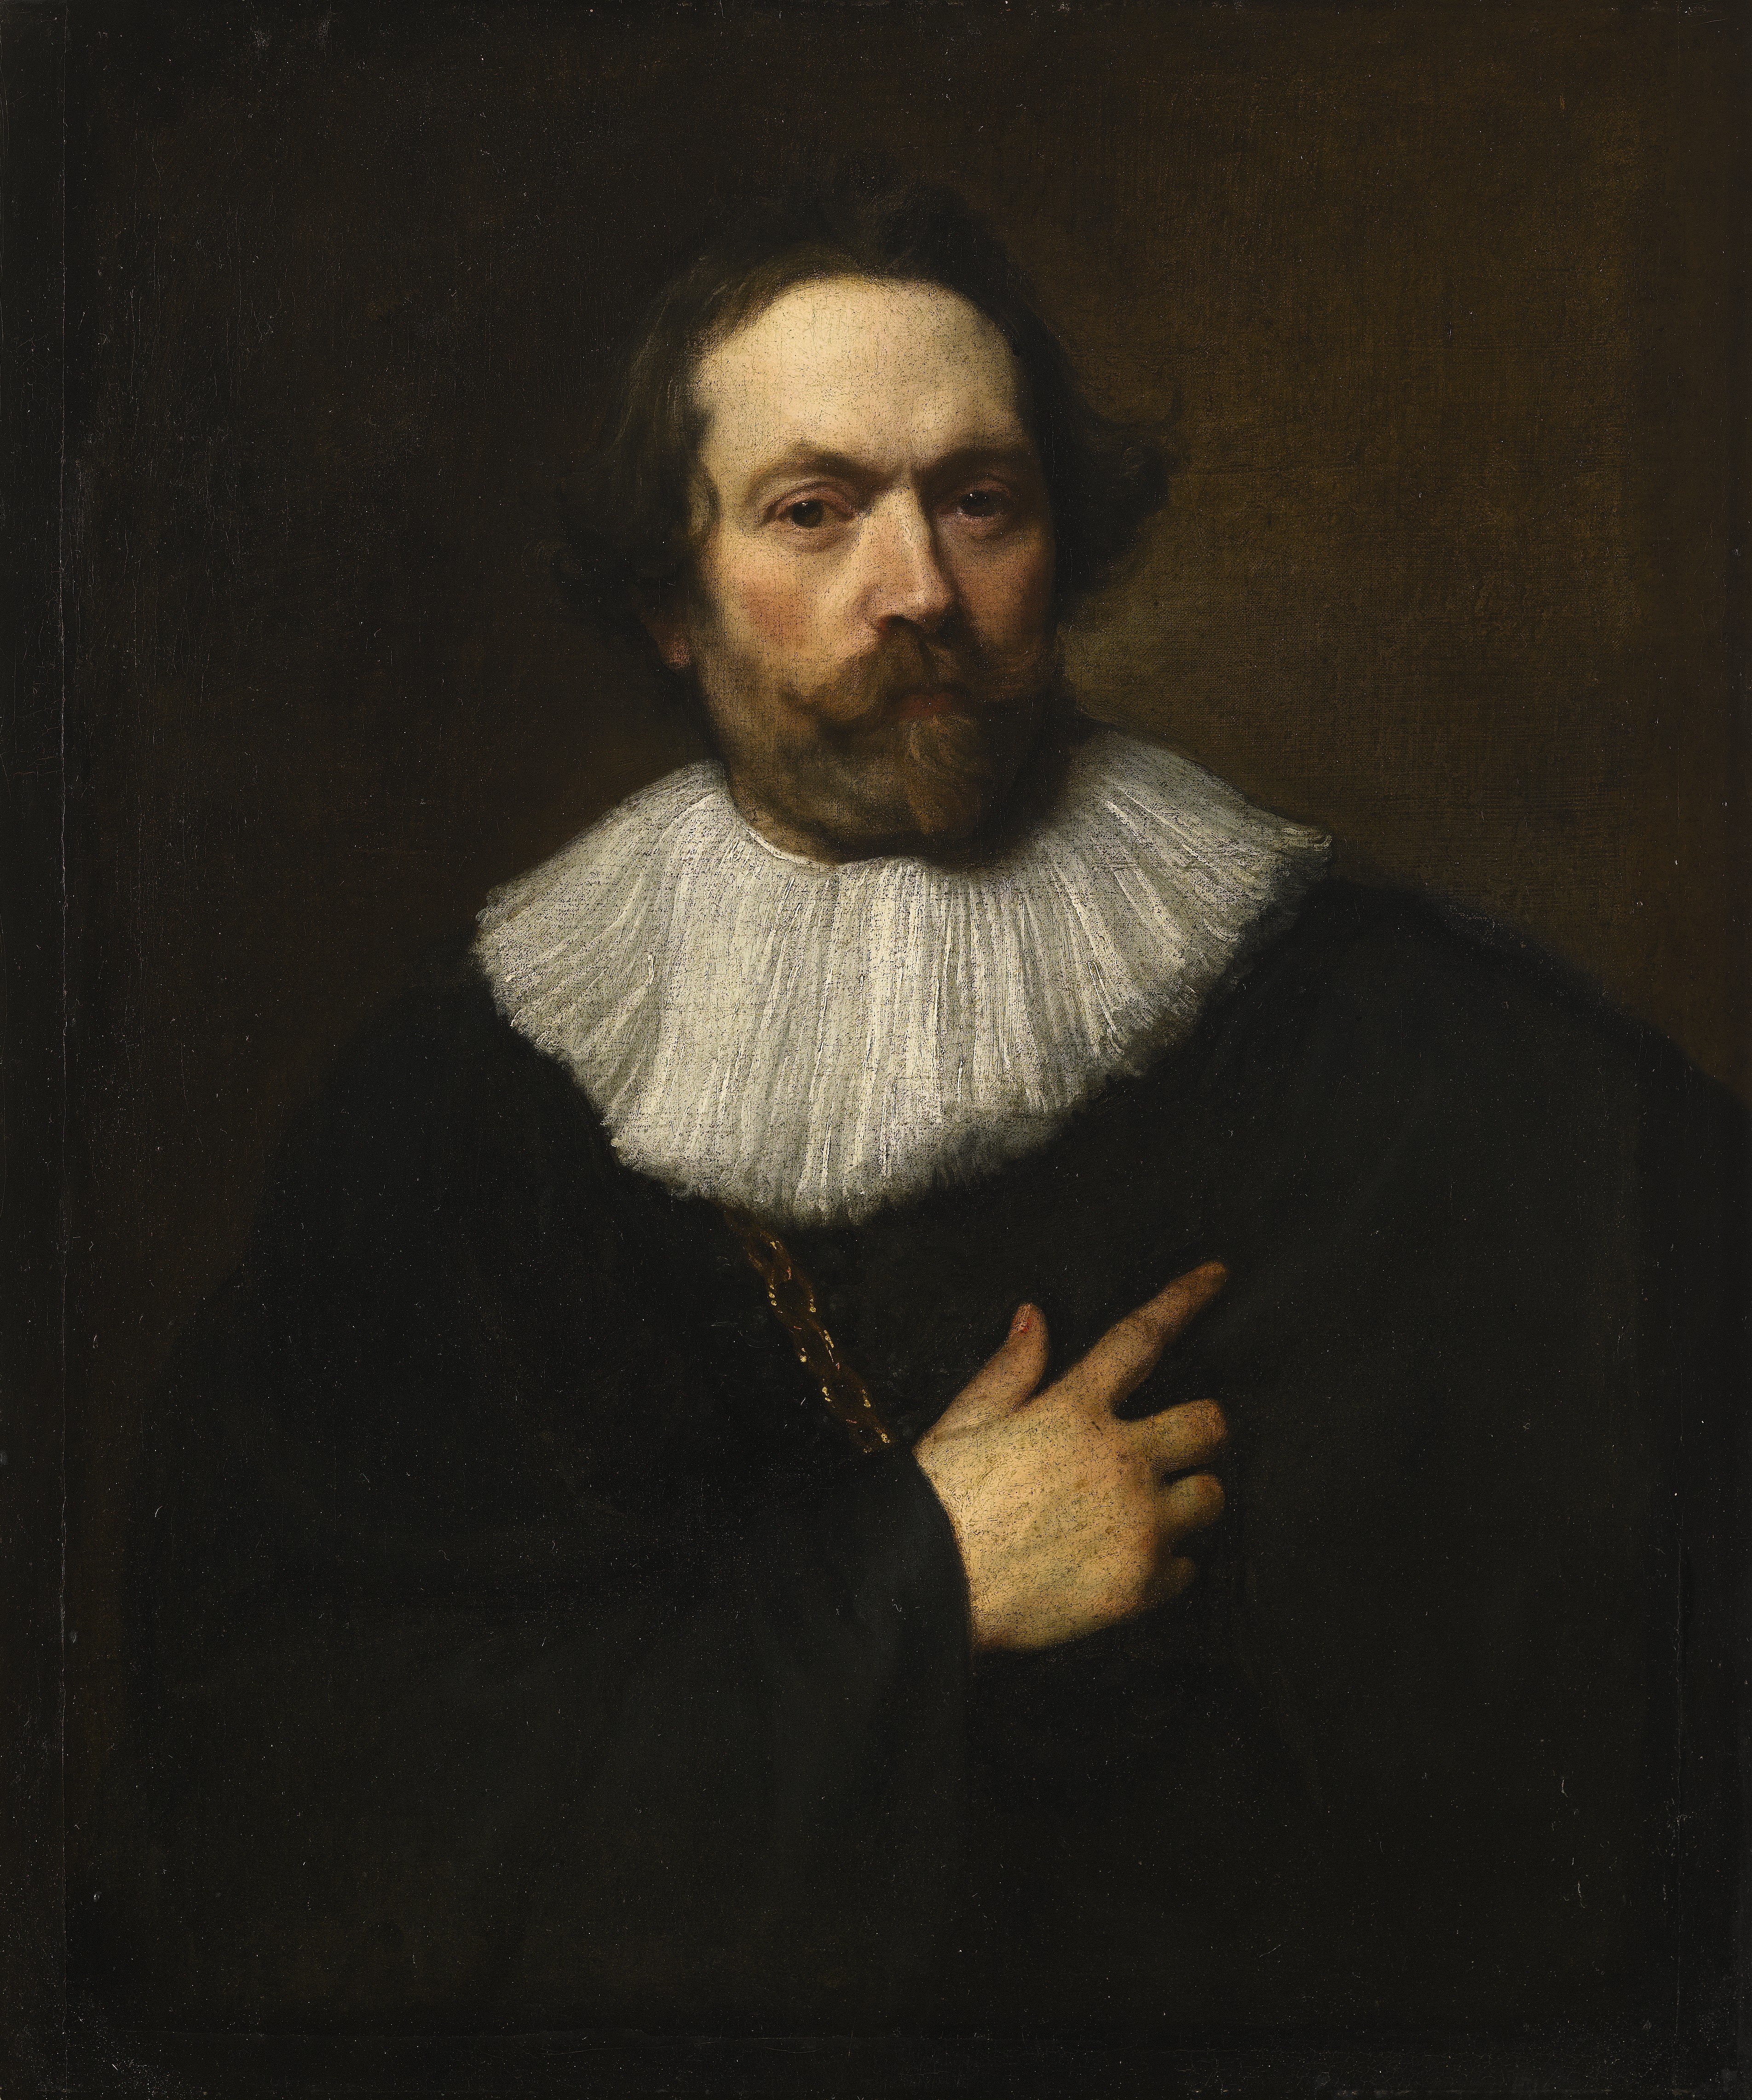 Who is 'Man with Beard'? - A Mysterious Portrait at Warwick Castle ...